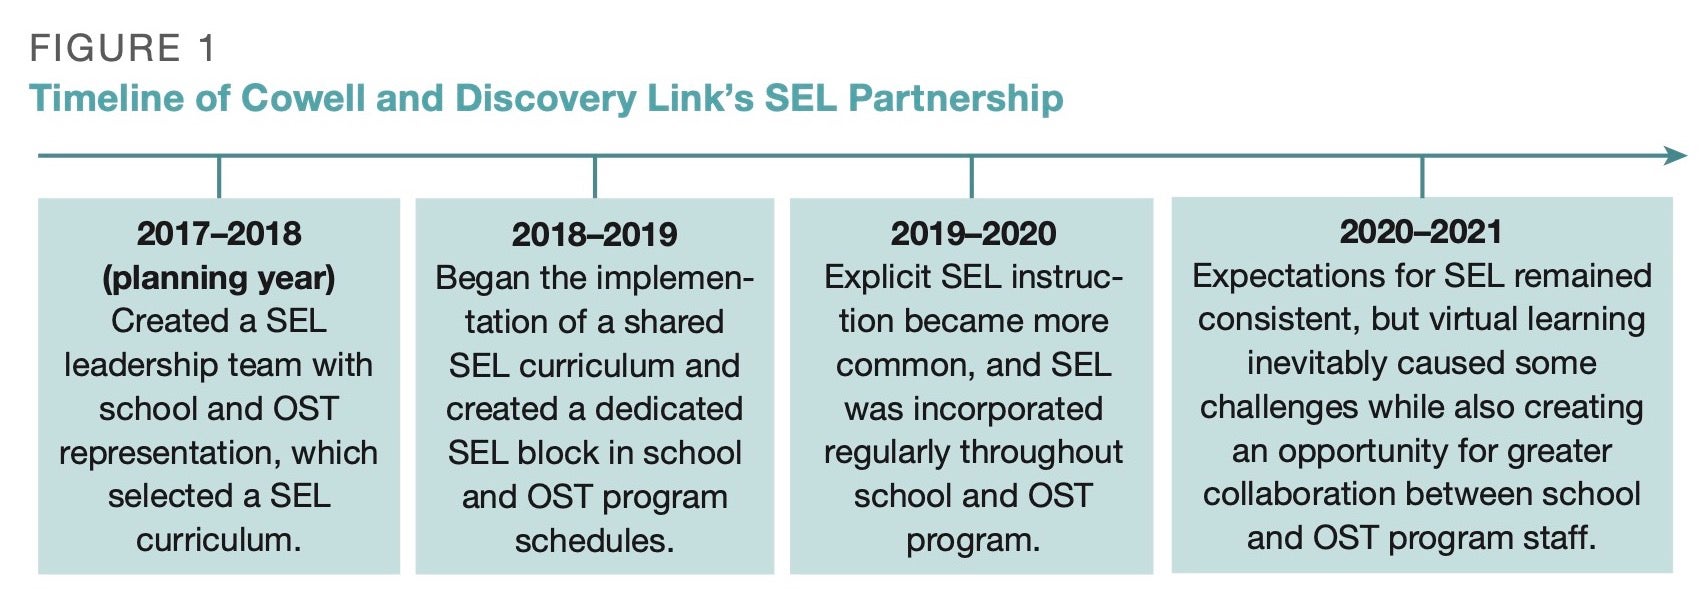 Timeline of Cowell and Discovery Link’s SEL Partnership